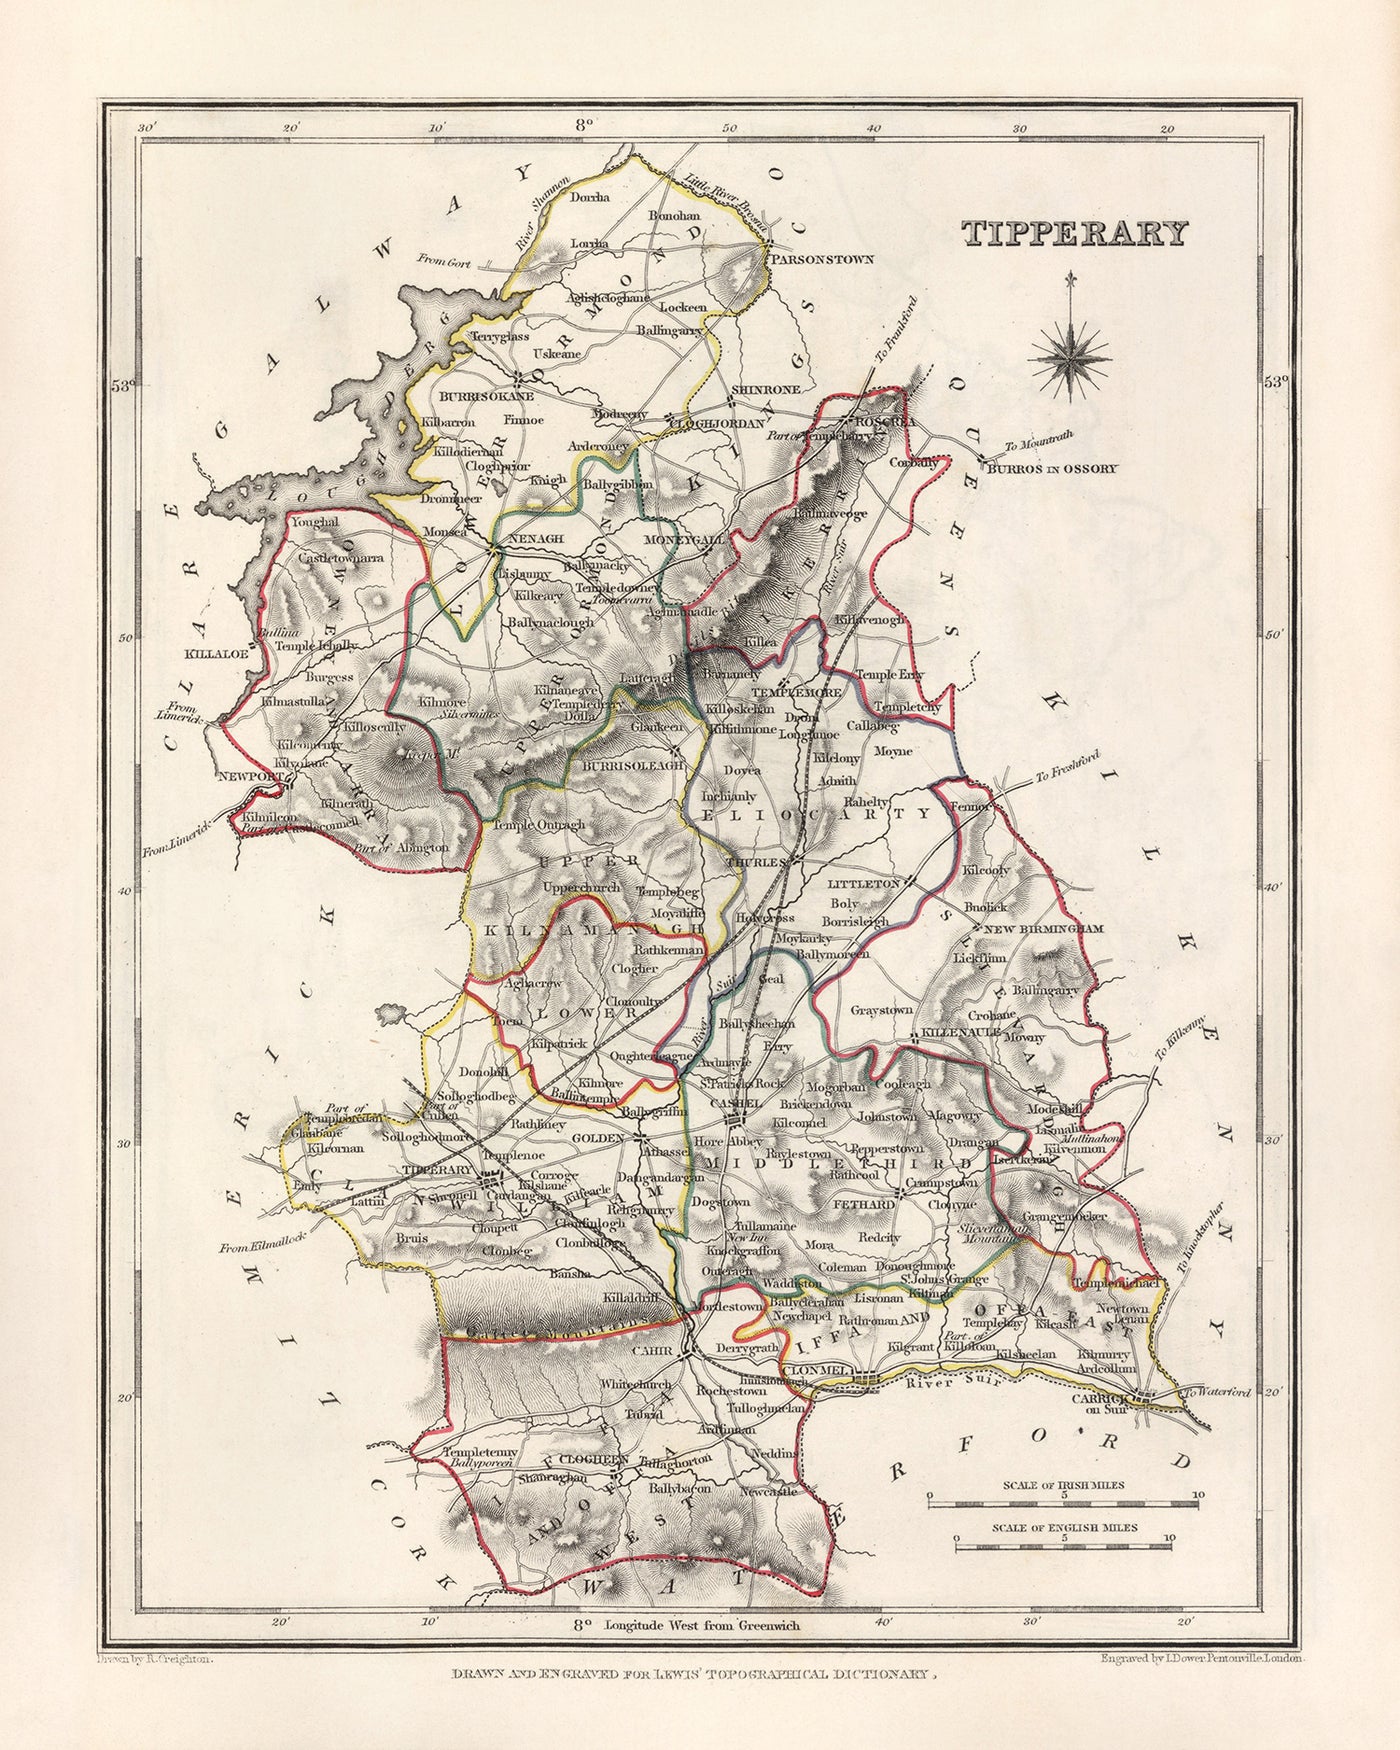 Old Map of County Tipperary by Samuel Lewis, 1844: Clonmel, Nenagh, Thurles, Cashel, Cahir